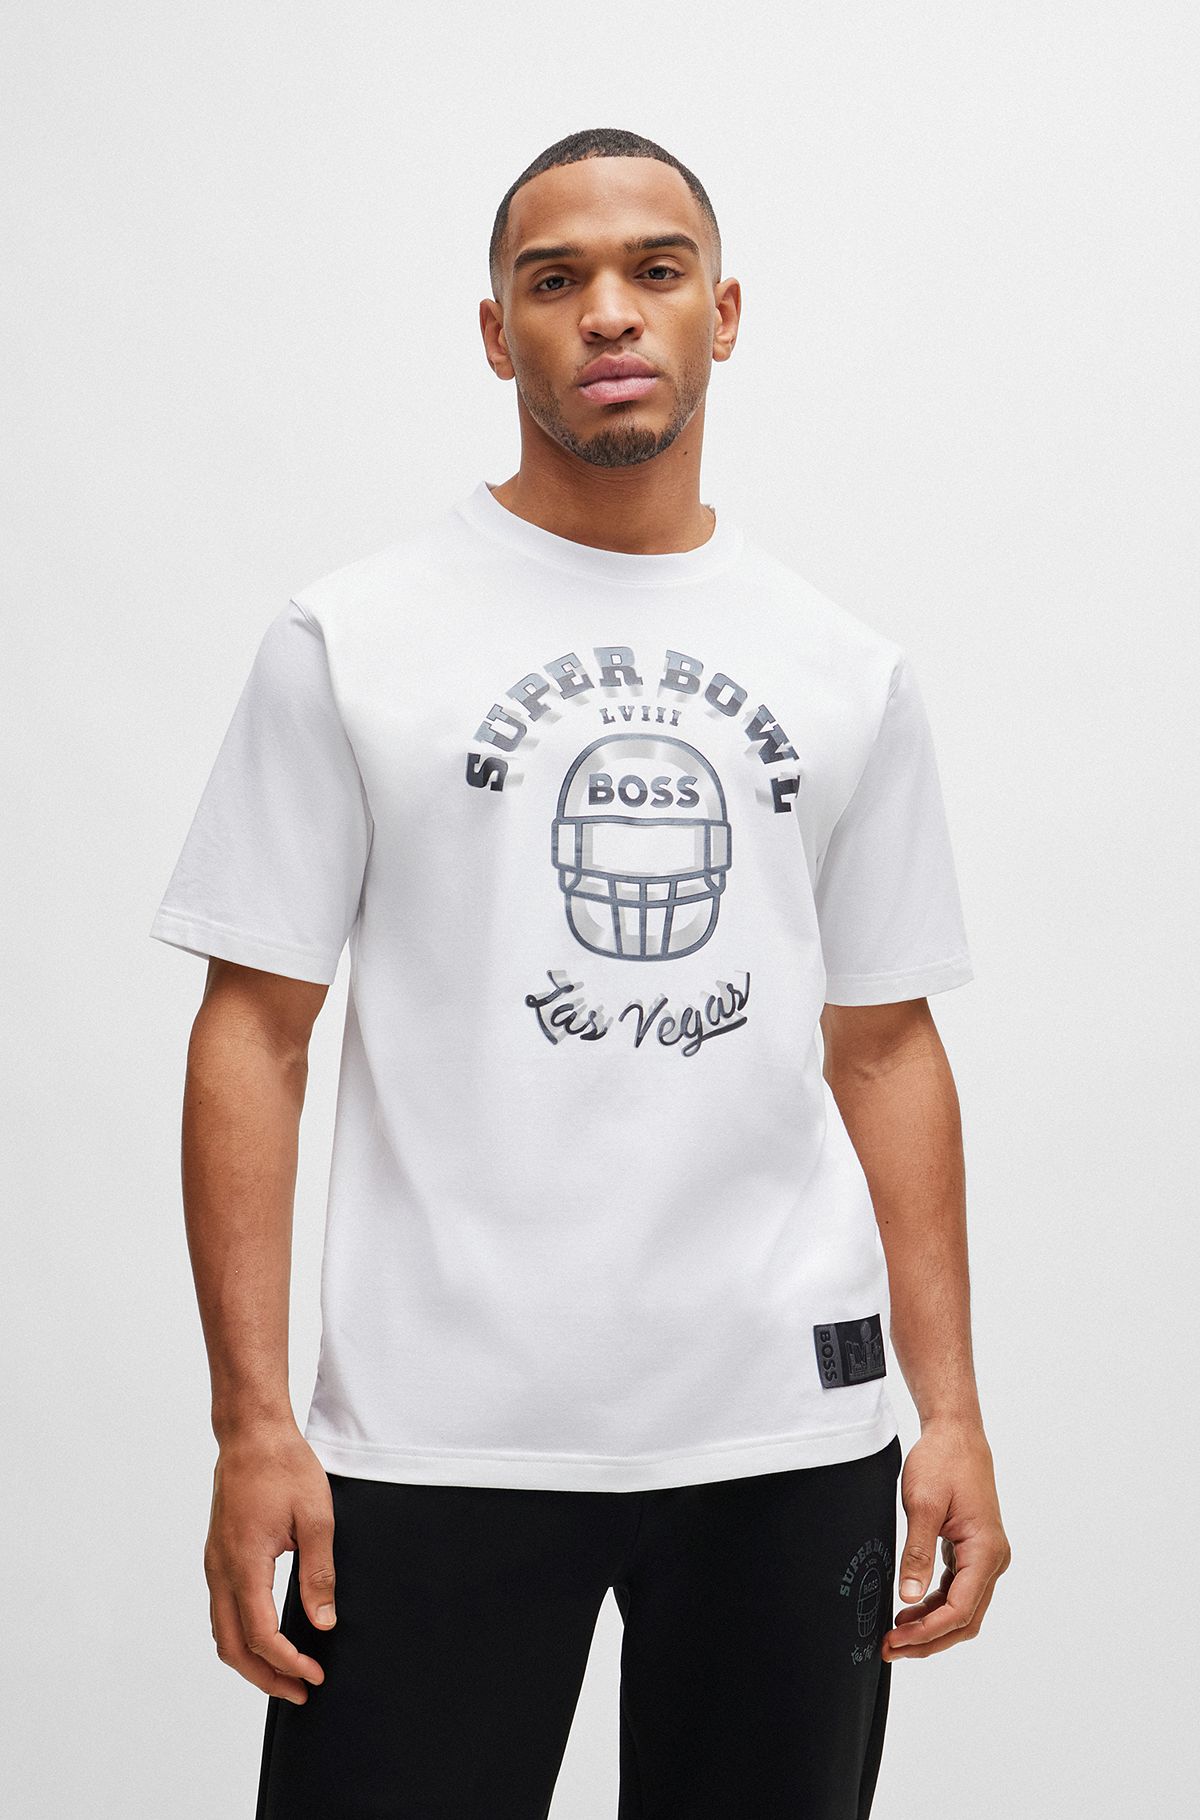 BOSS x NFL stretch-cotton T-shirt with printed artwork, White